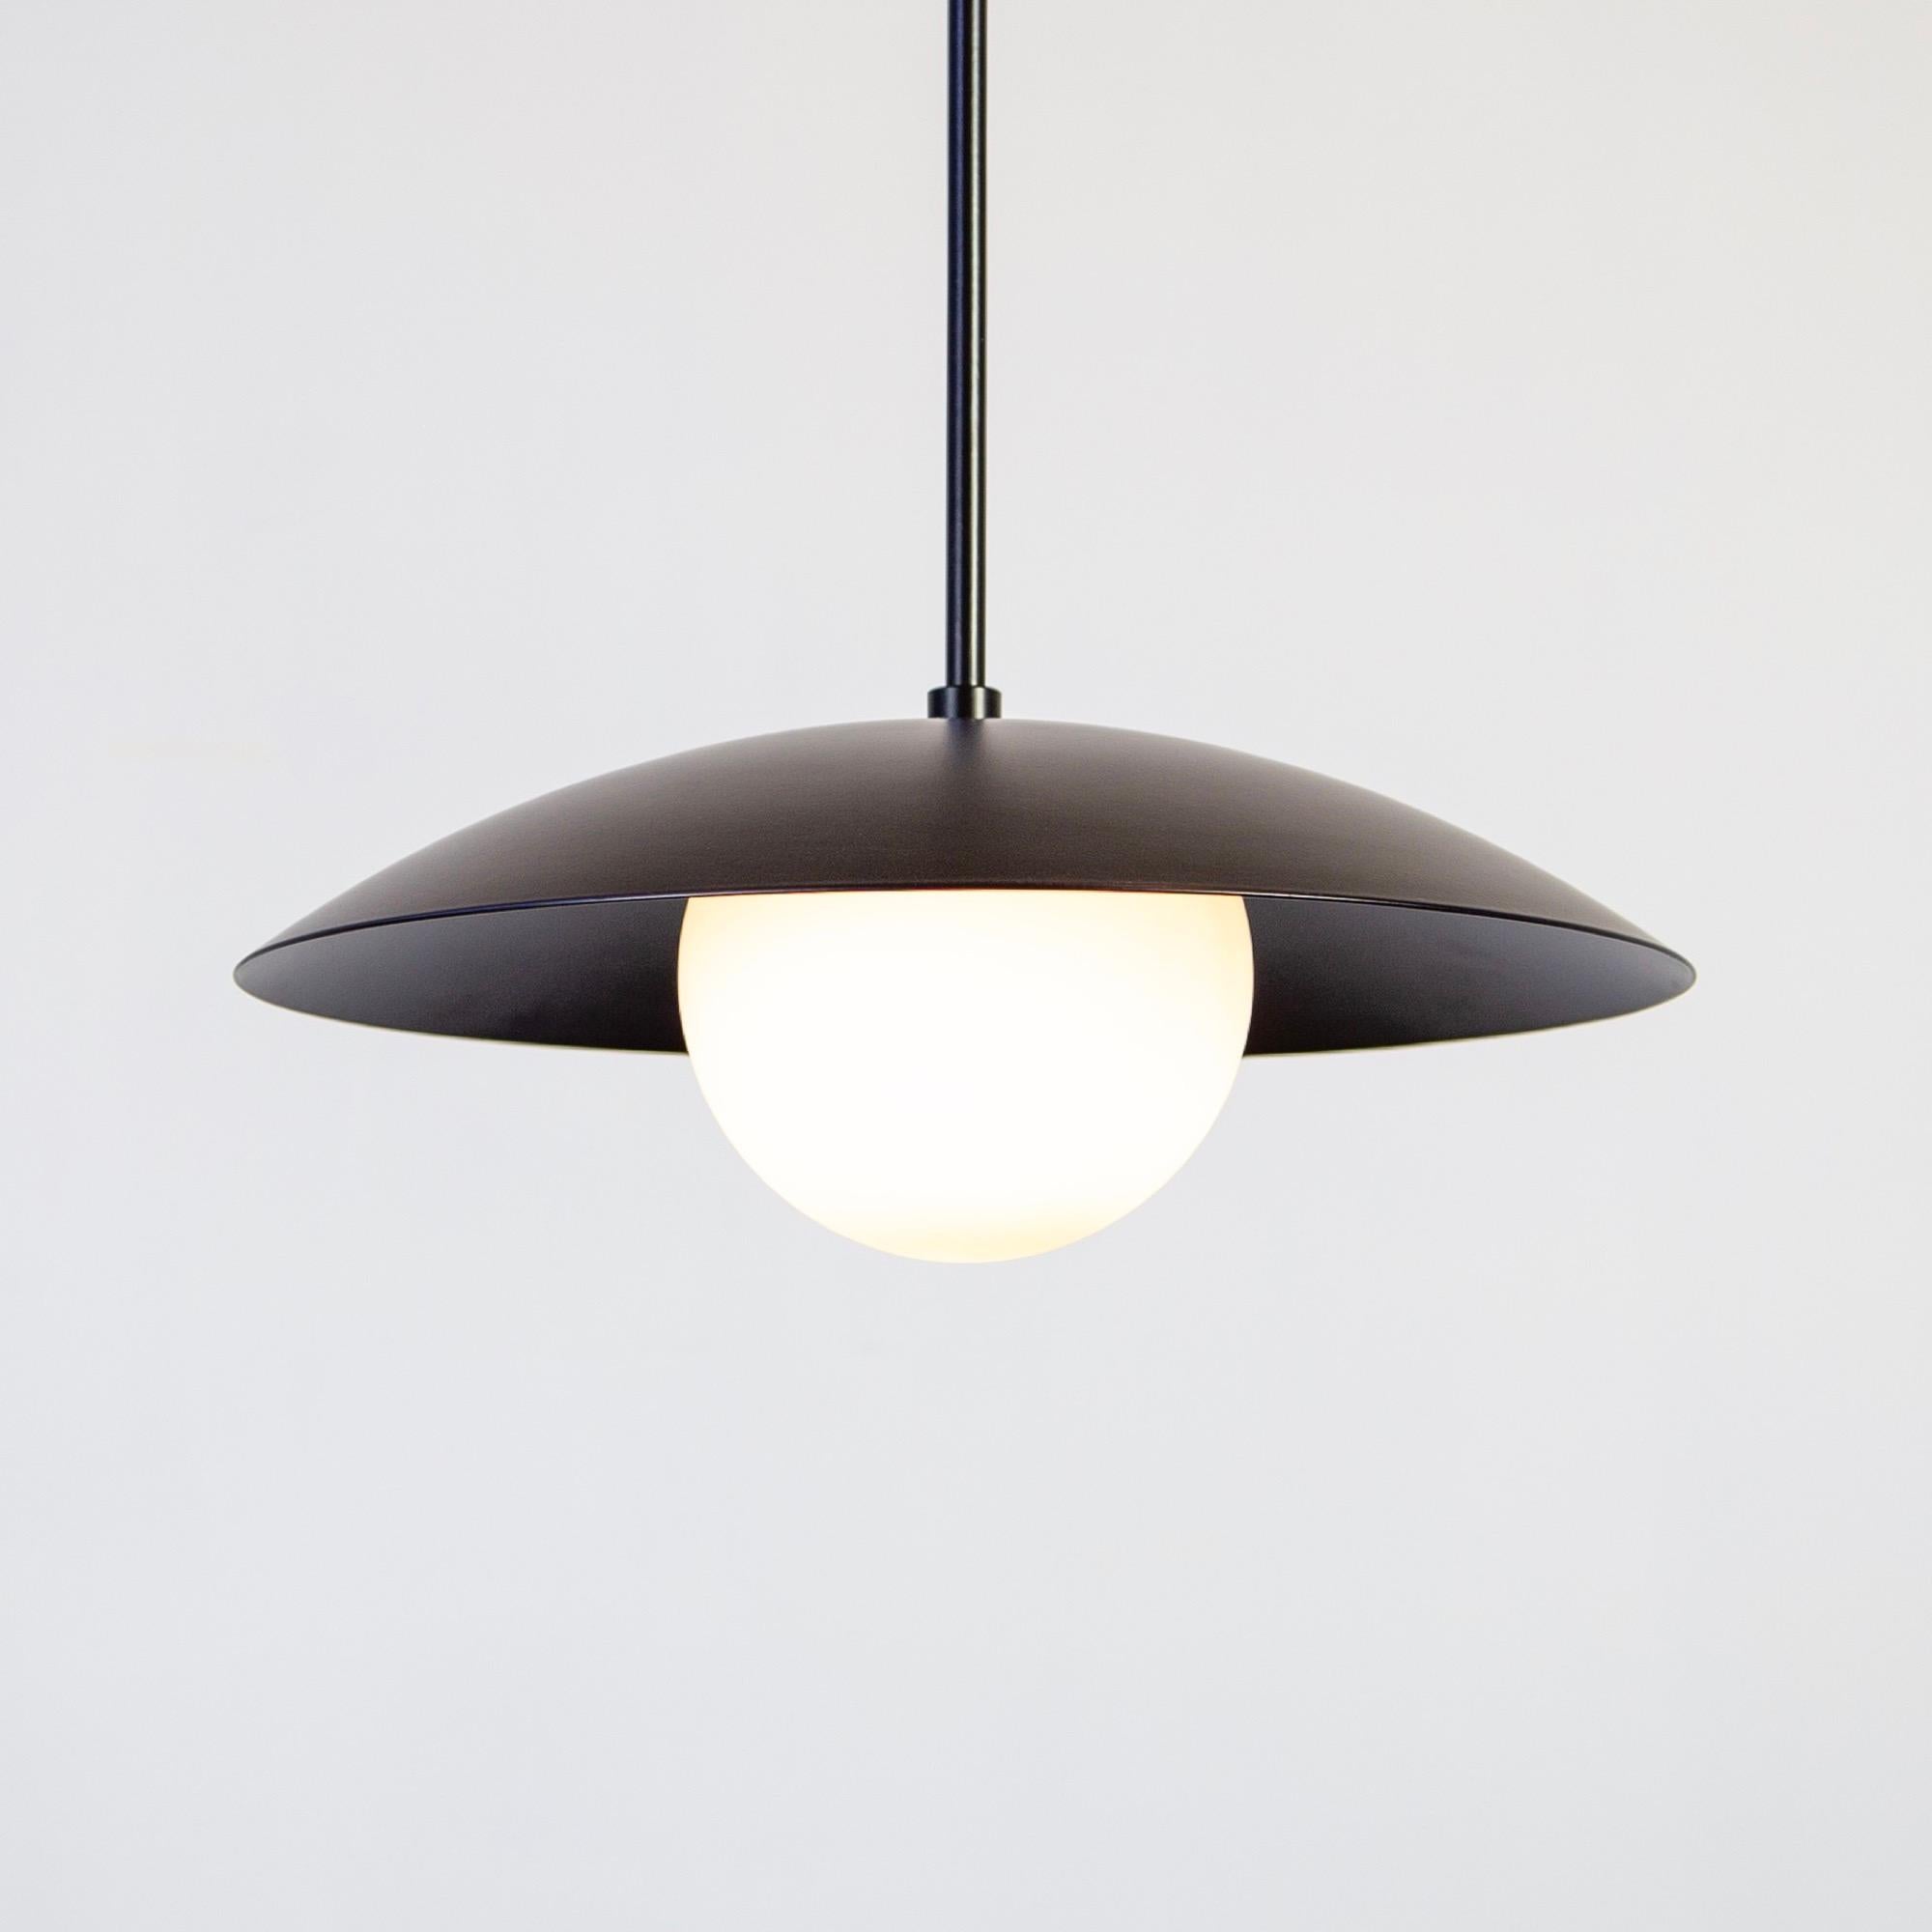 This listing is for 1x Dish Pendant in Black designed and manufactured by RESEARCH Lighting.

Lead Time: ~6 Weeks
Materials: steel & glass
Finish: powder coated steel in black
Electronics: 1x G8 Socket, 6 Watt LED Bulb (included), 600